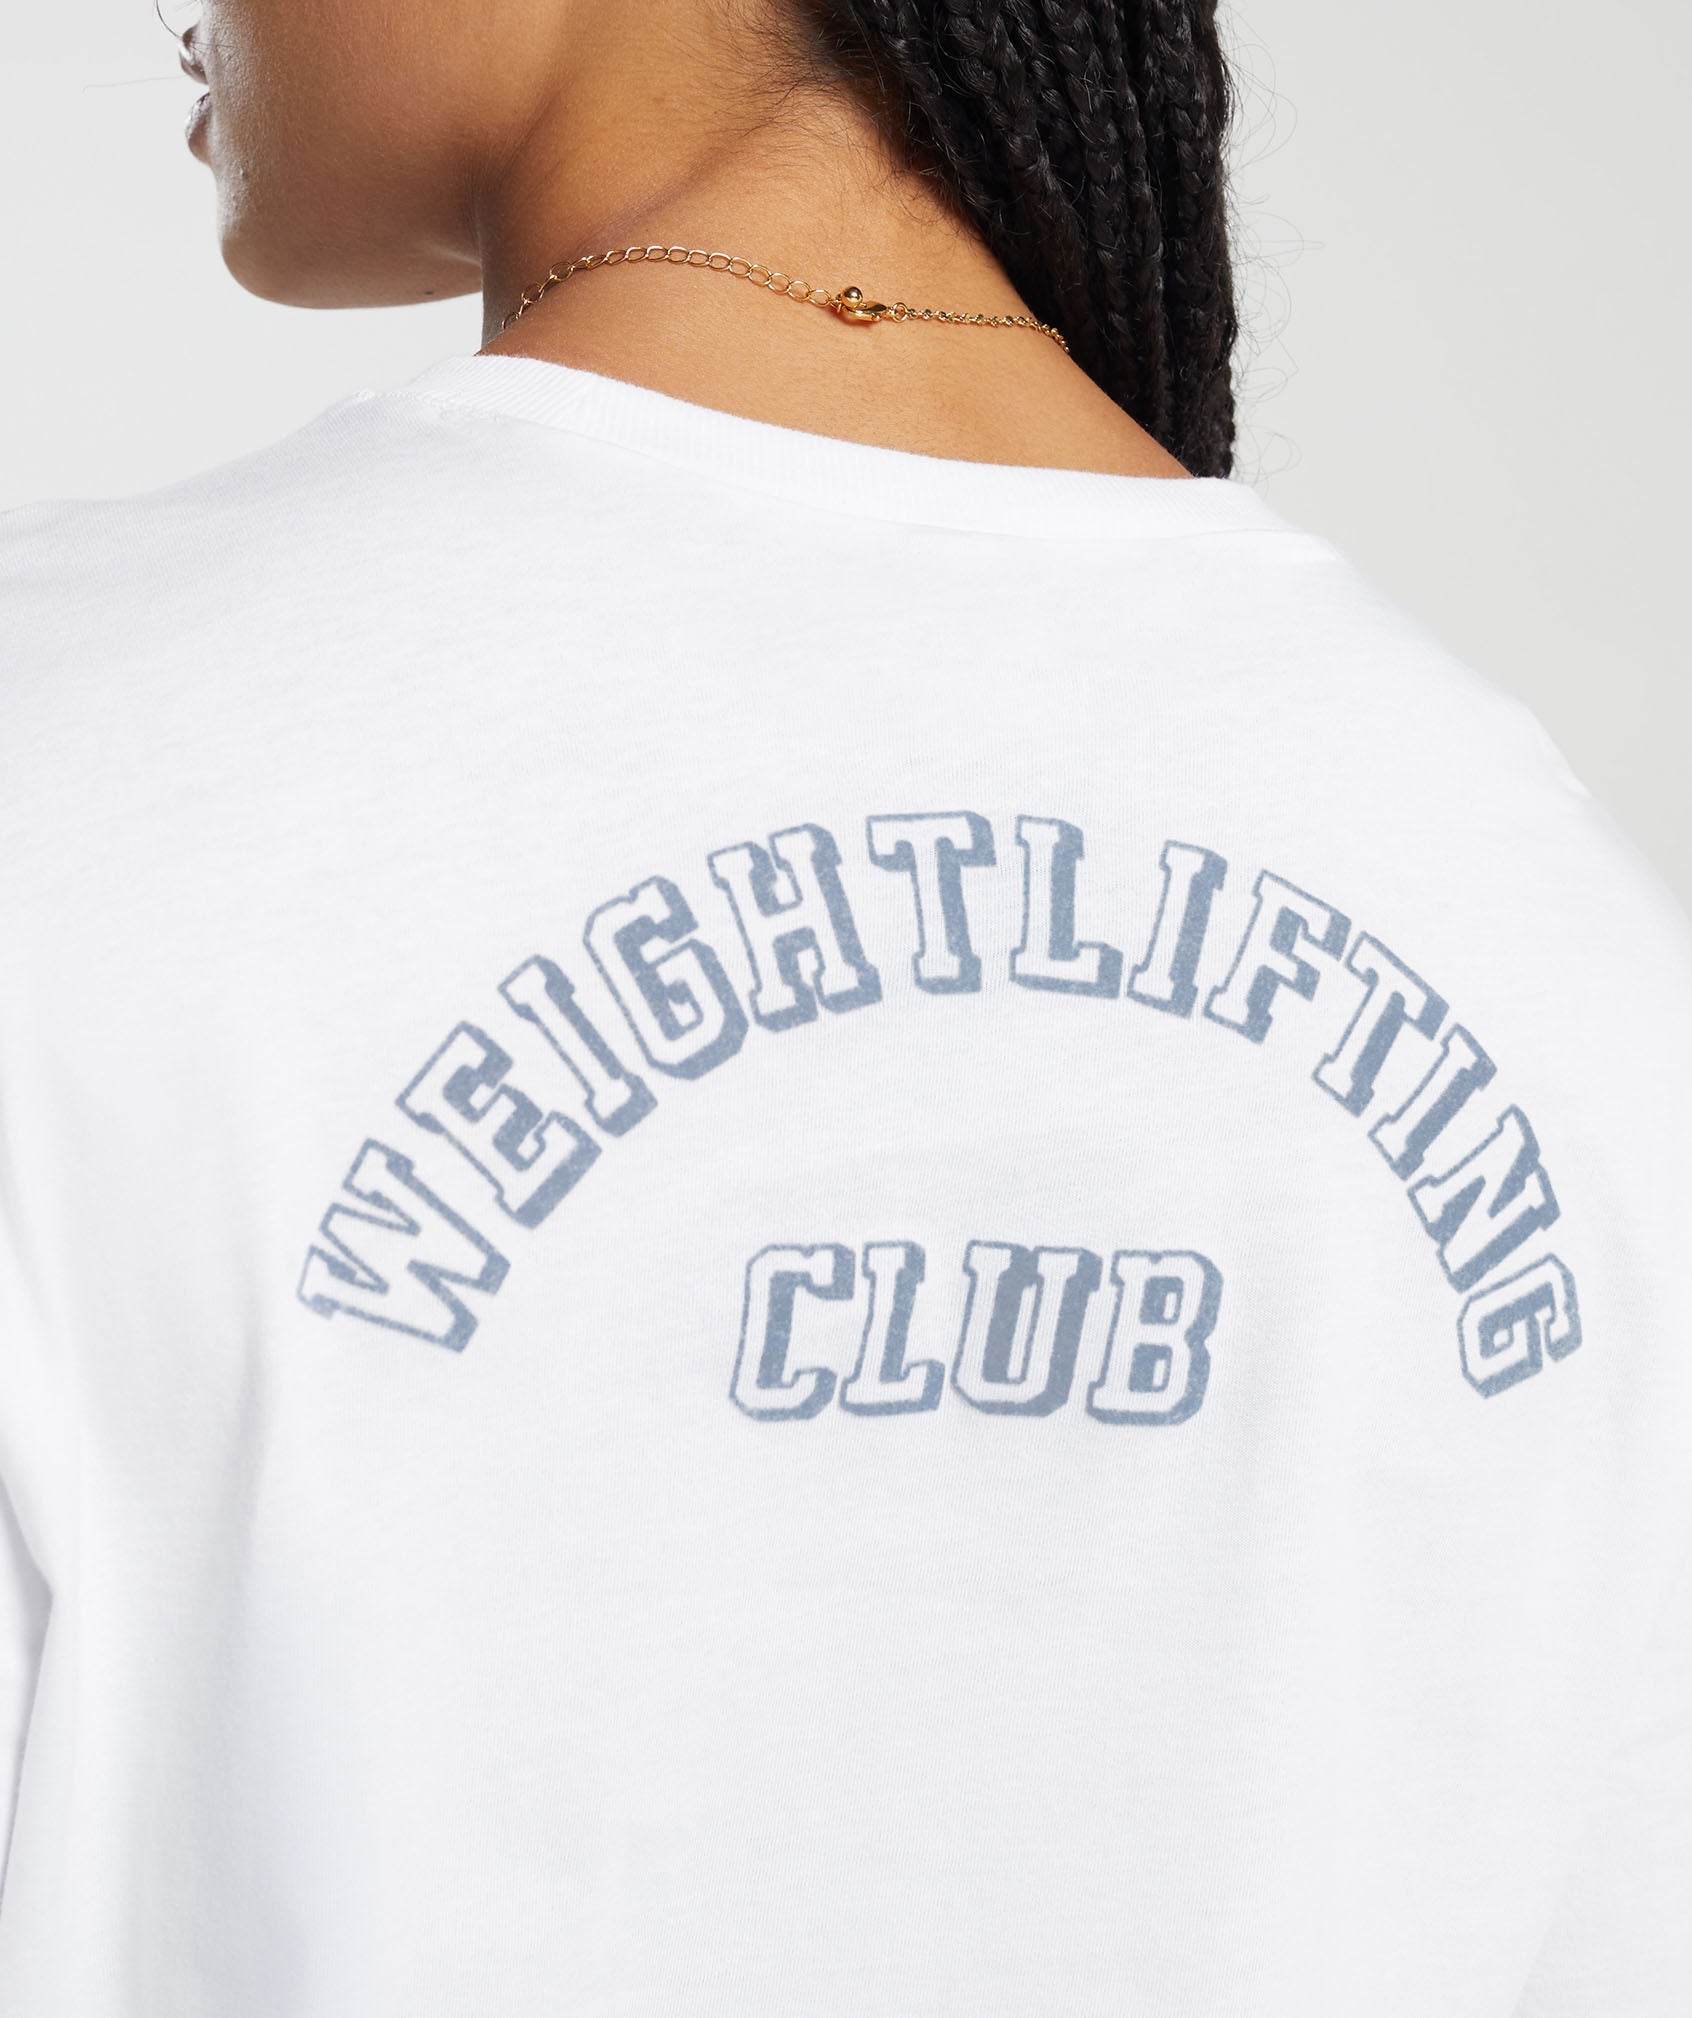 Weightlifting Long Sleeve Top in White - view 5